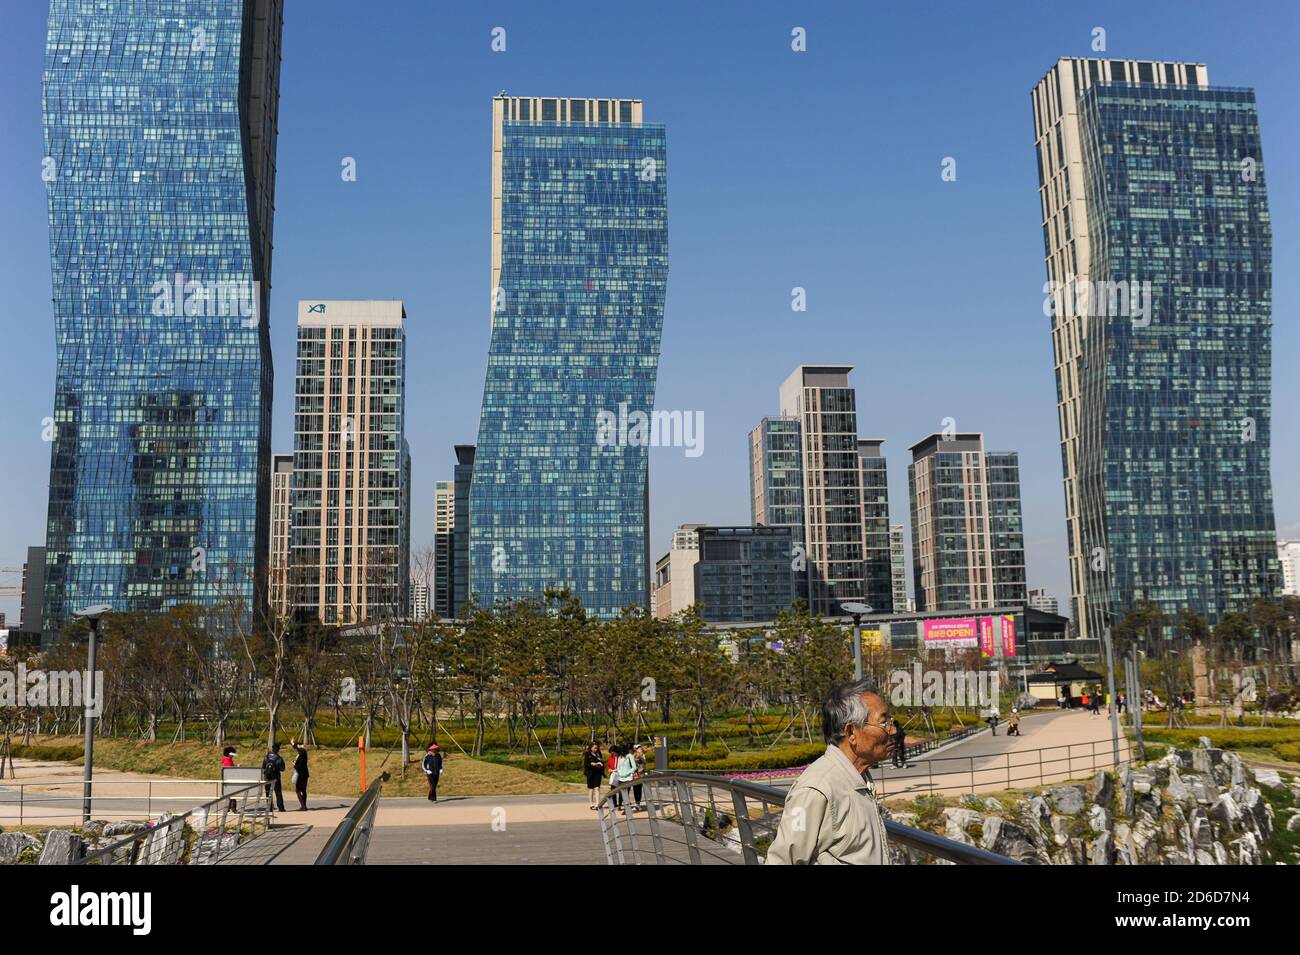 01.05.2013, Seoul, Incheon, South Korea - People in front of the New Songdo City in Central Park and the international business district with modern r Stock Photo